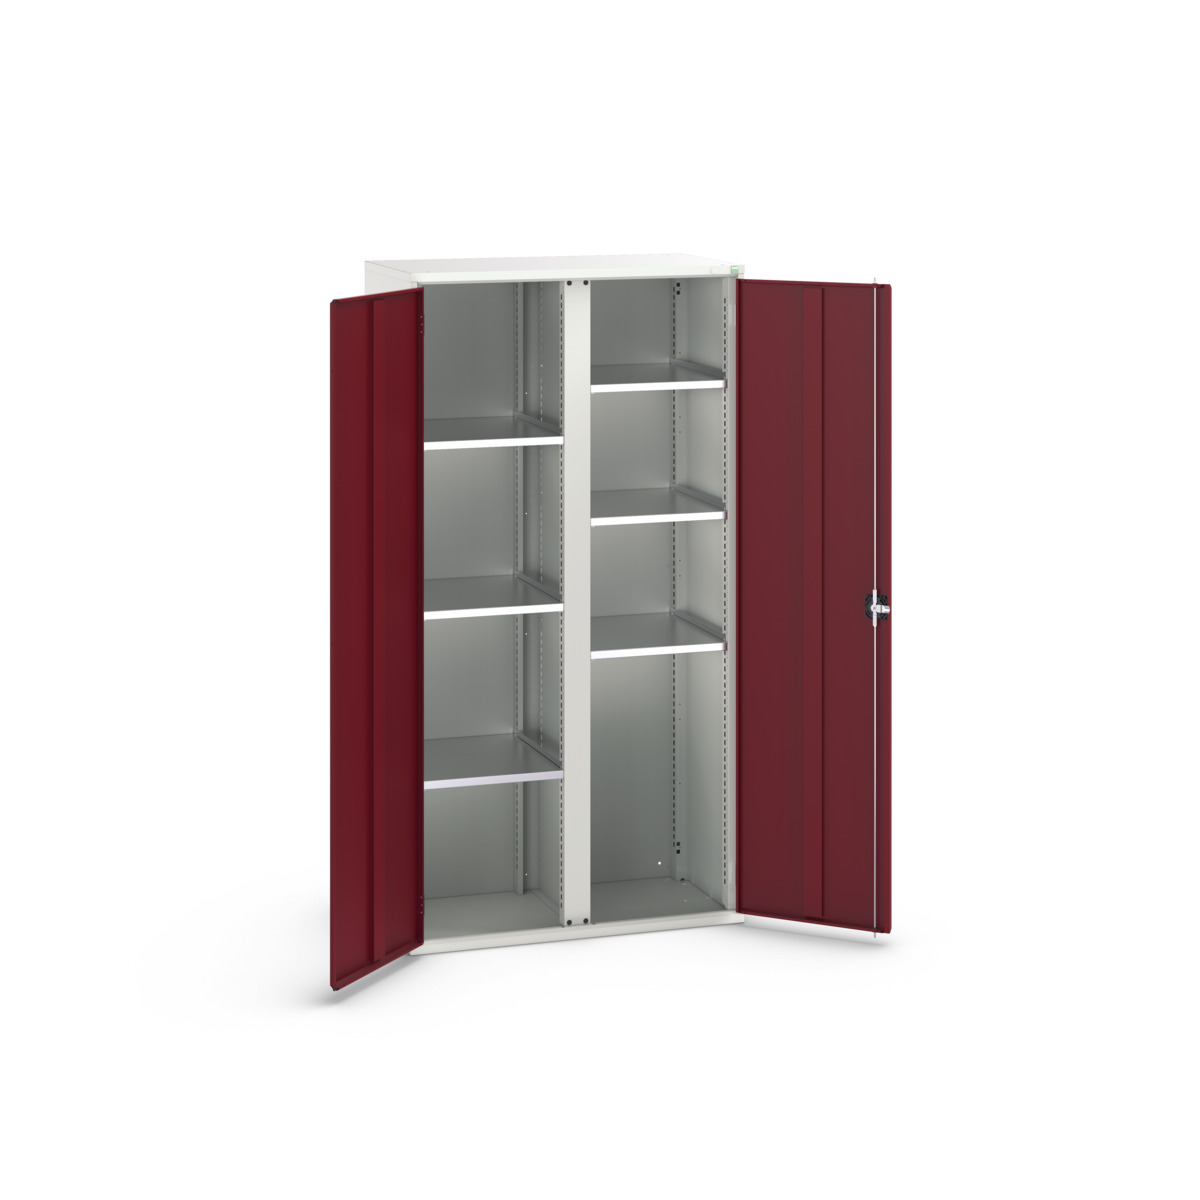 16926580.24 - verso kitted cupboard